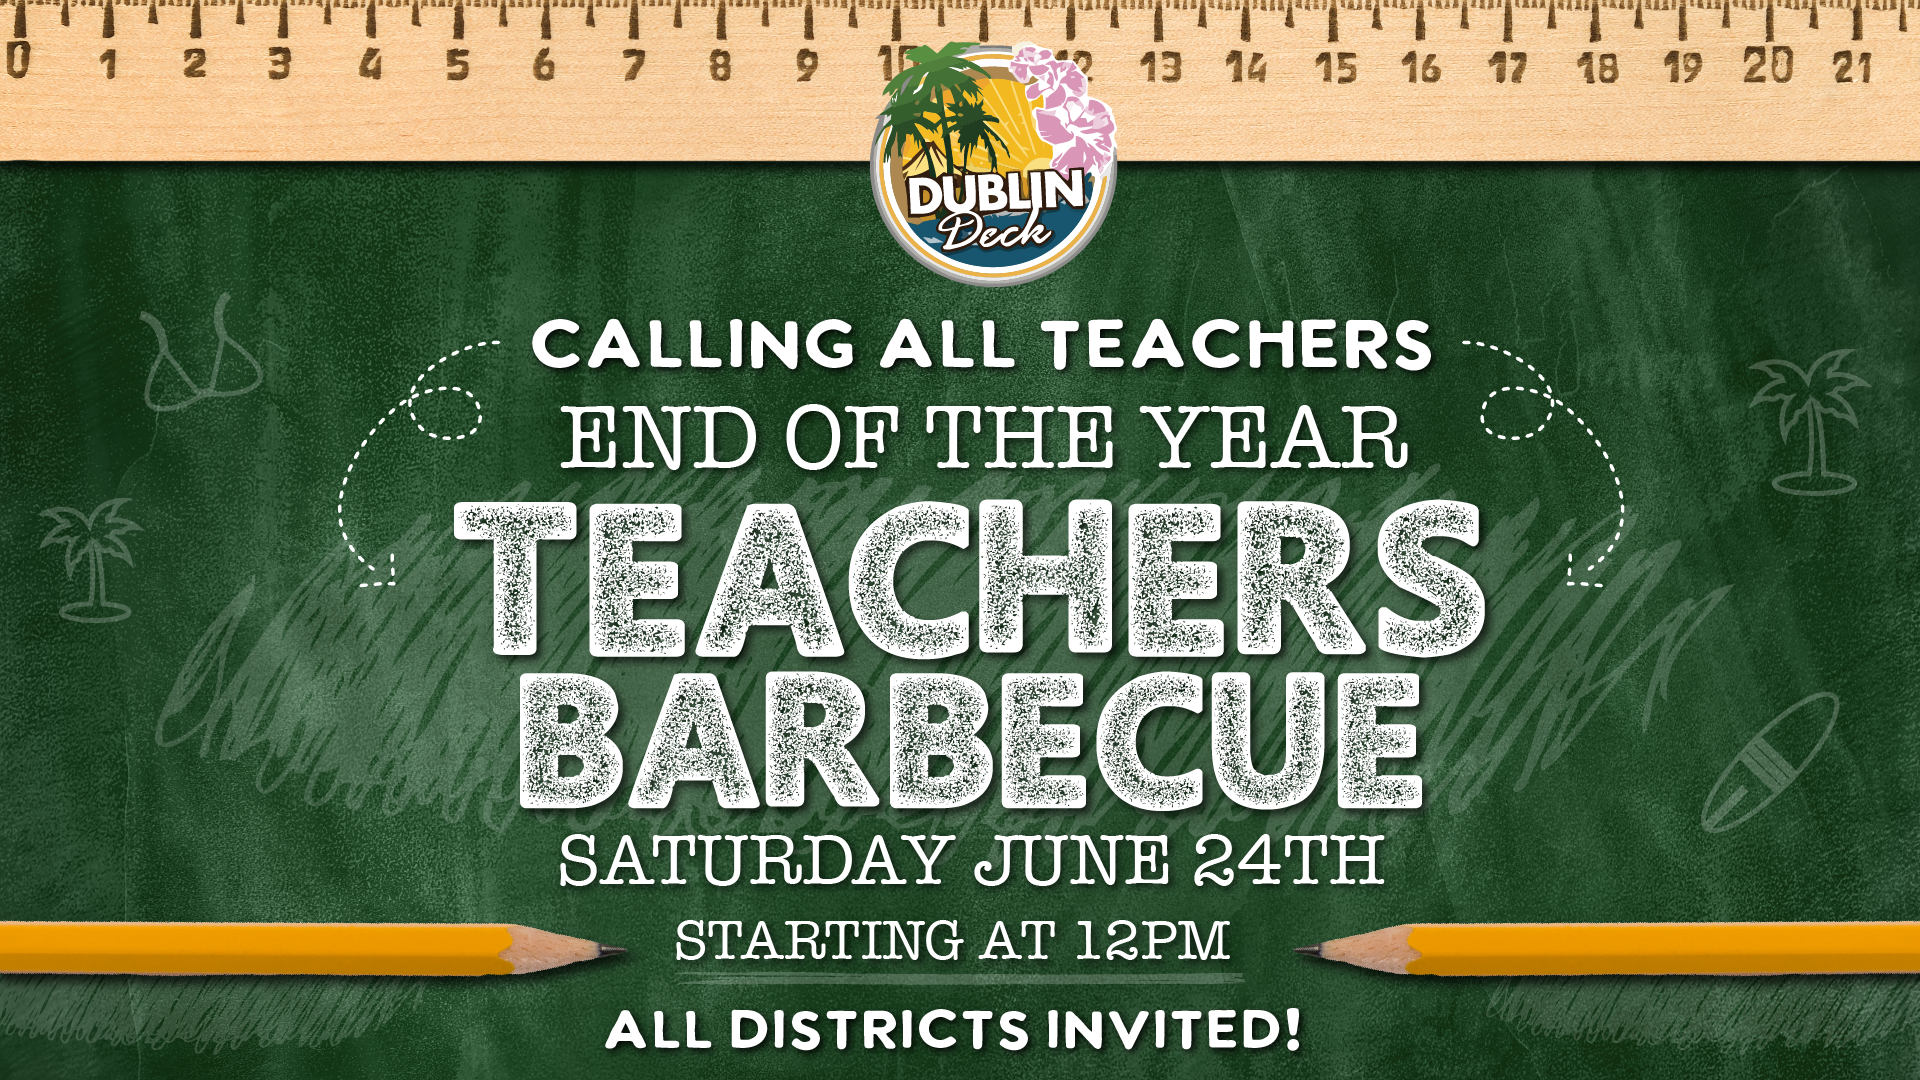 Calling all teachers! Our annual teacher's BBQ is on Saturday, June 24th! Your $10 admission includes free BBQ buffet and one drink ticket and lots of fun! Doors open at 12PM with live music by 2 bands. 